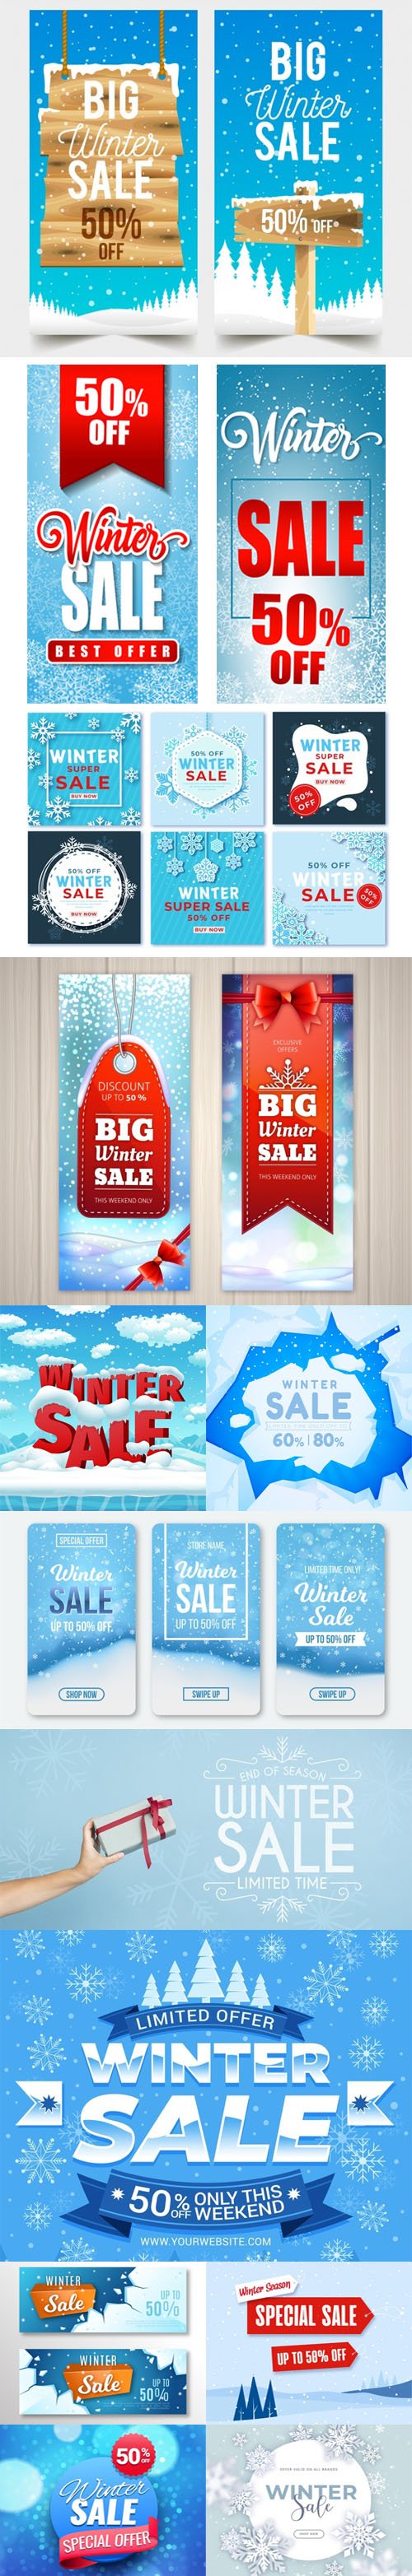 14 Winter Sales Banners & Backgrounds Collection in Vector